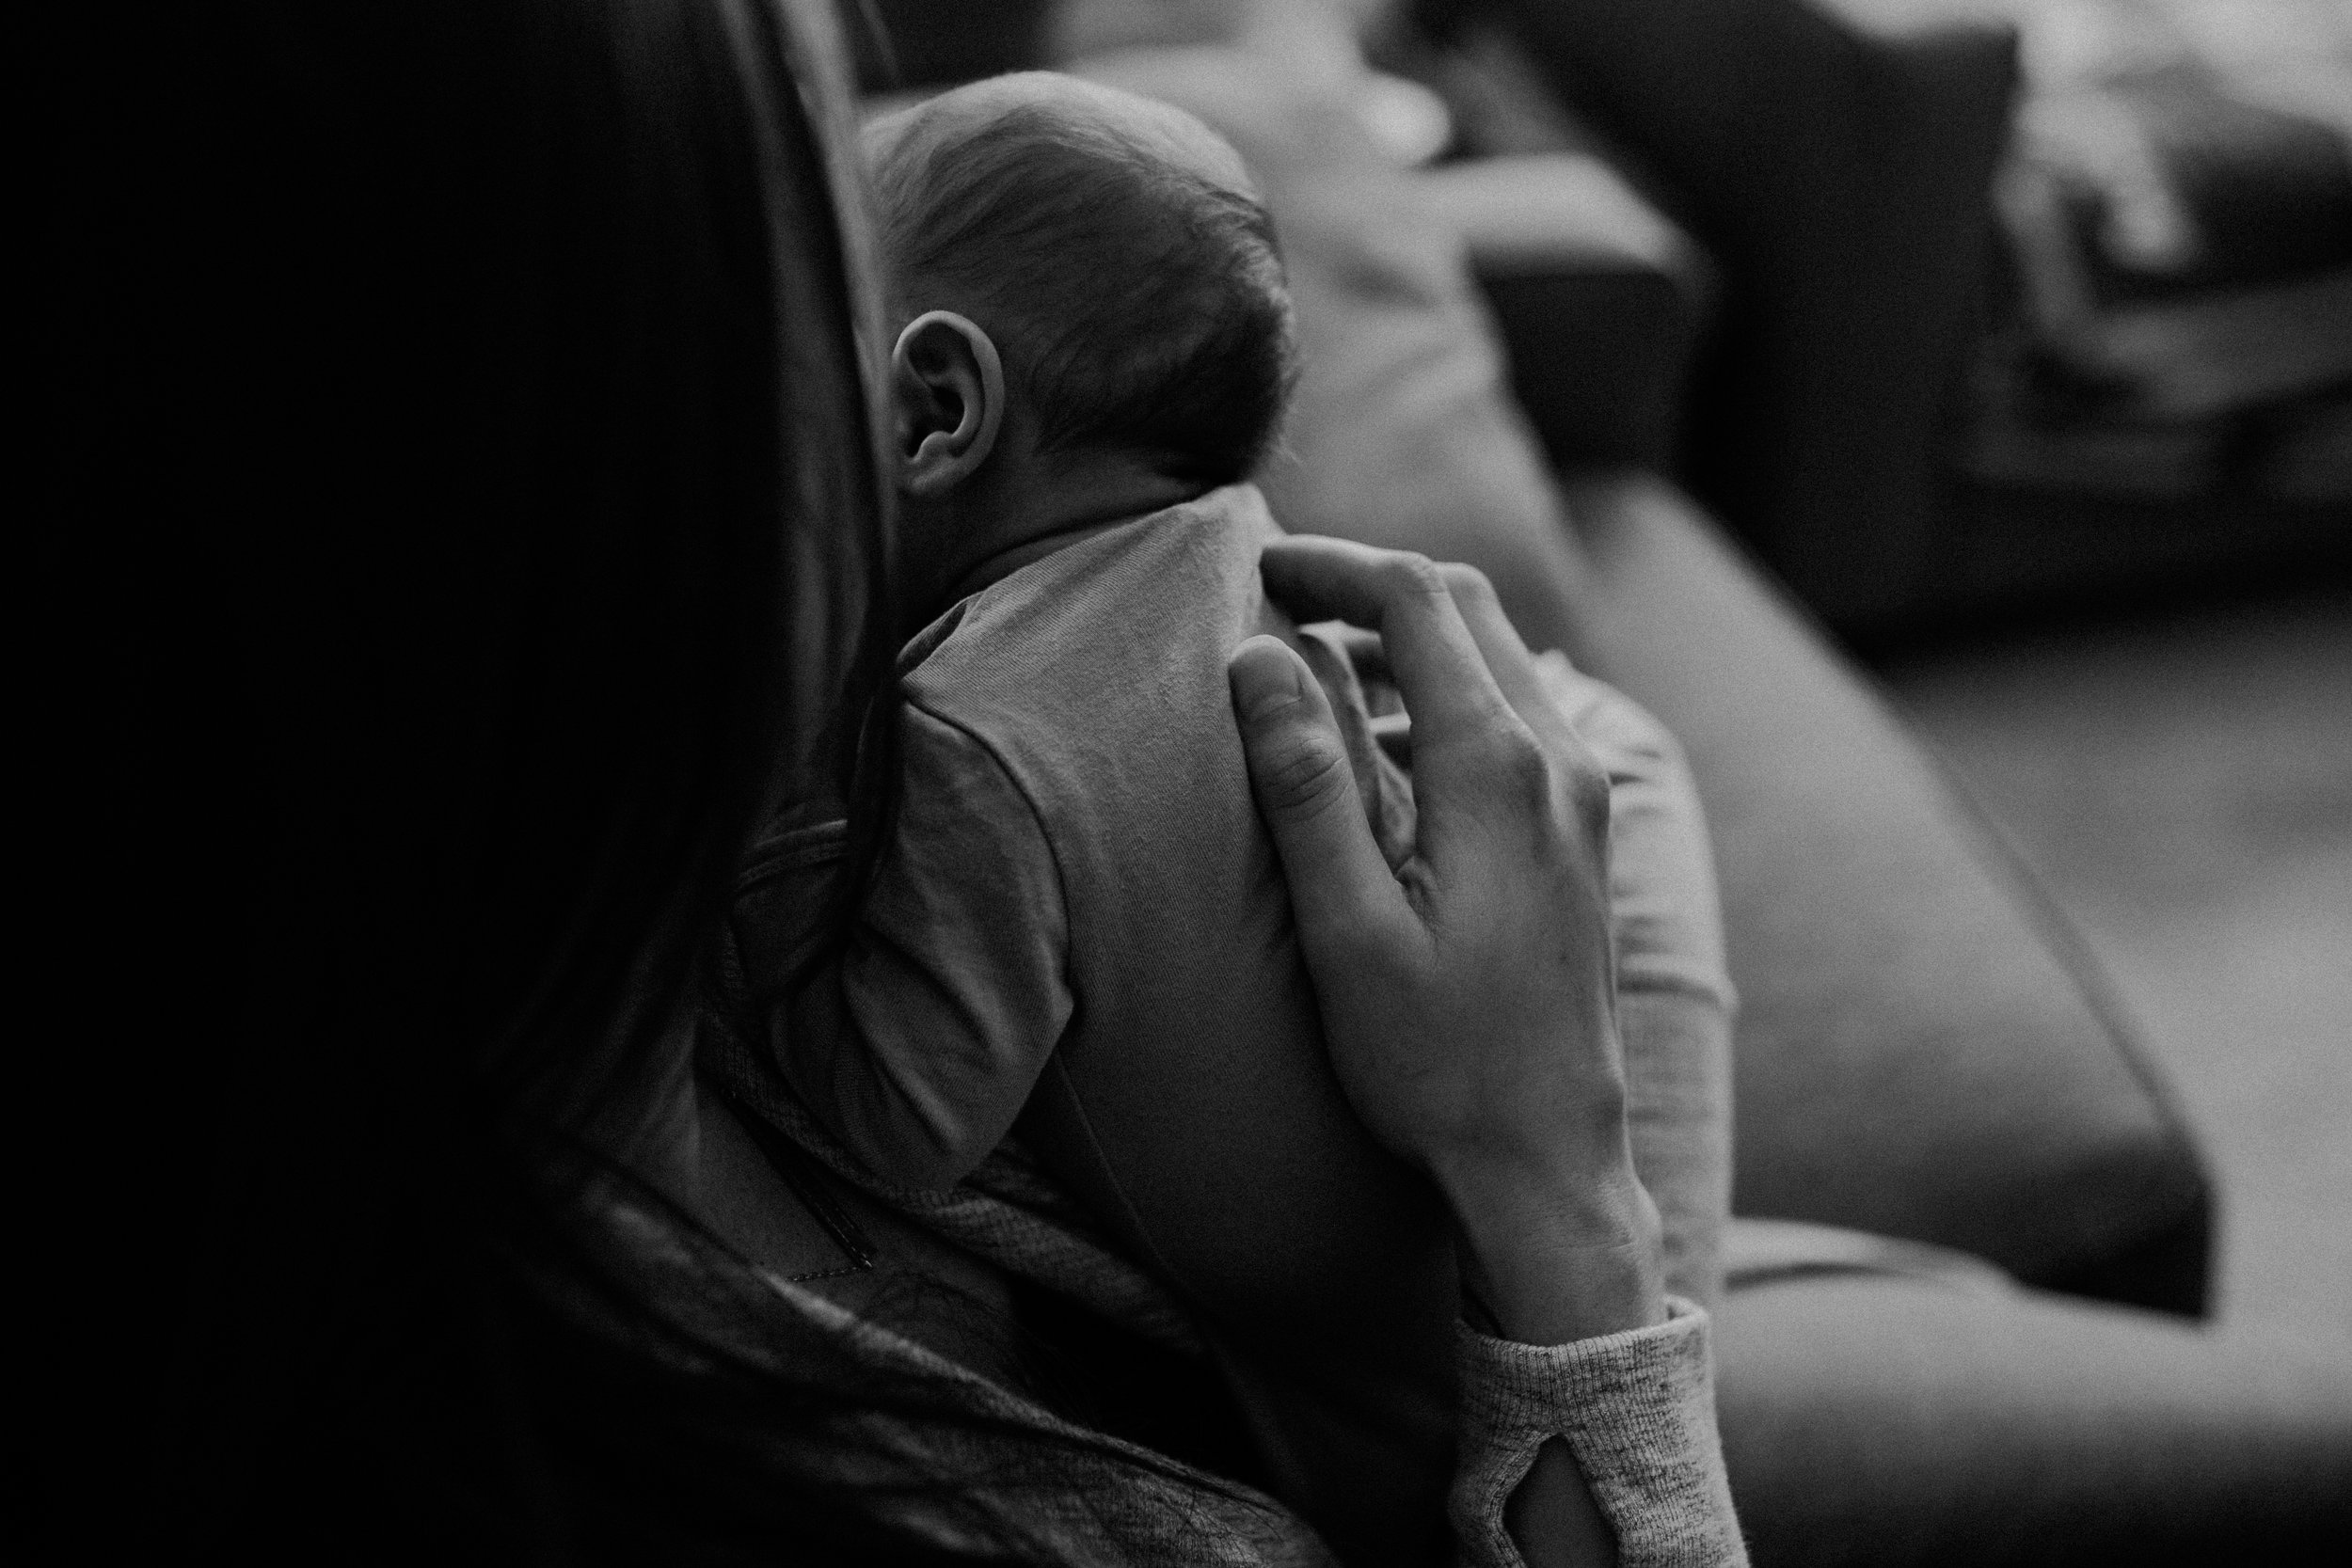  lifestyle image in black and white of mom holding newborn baby boy 